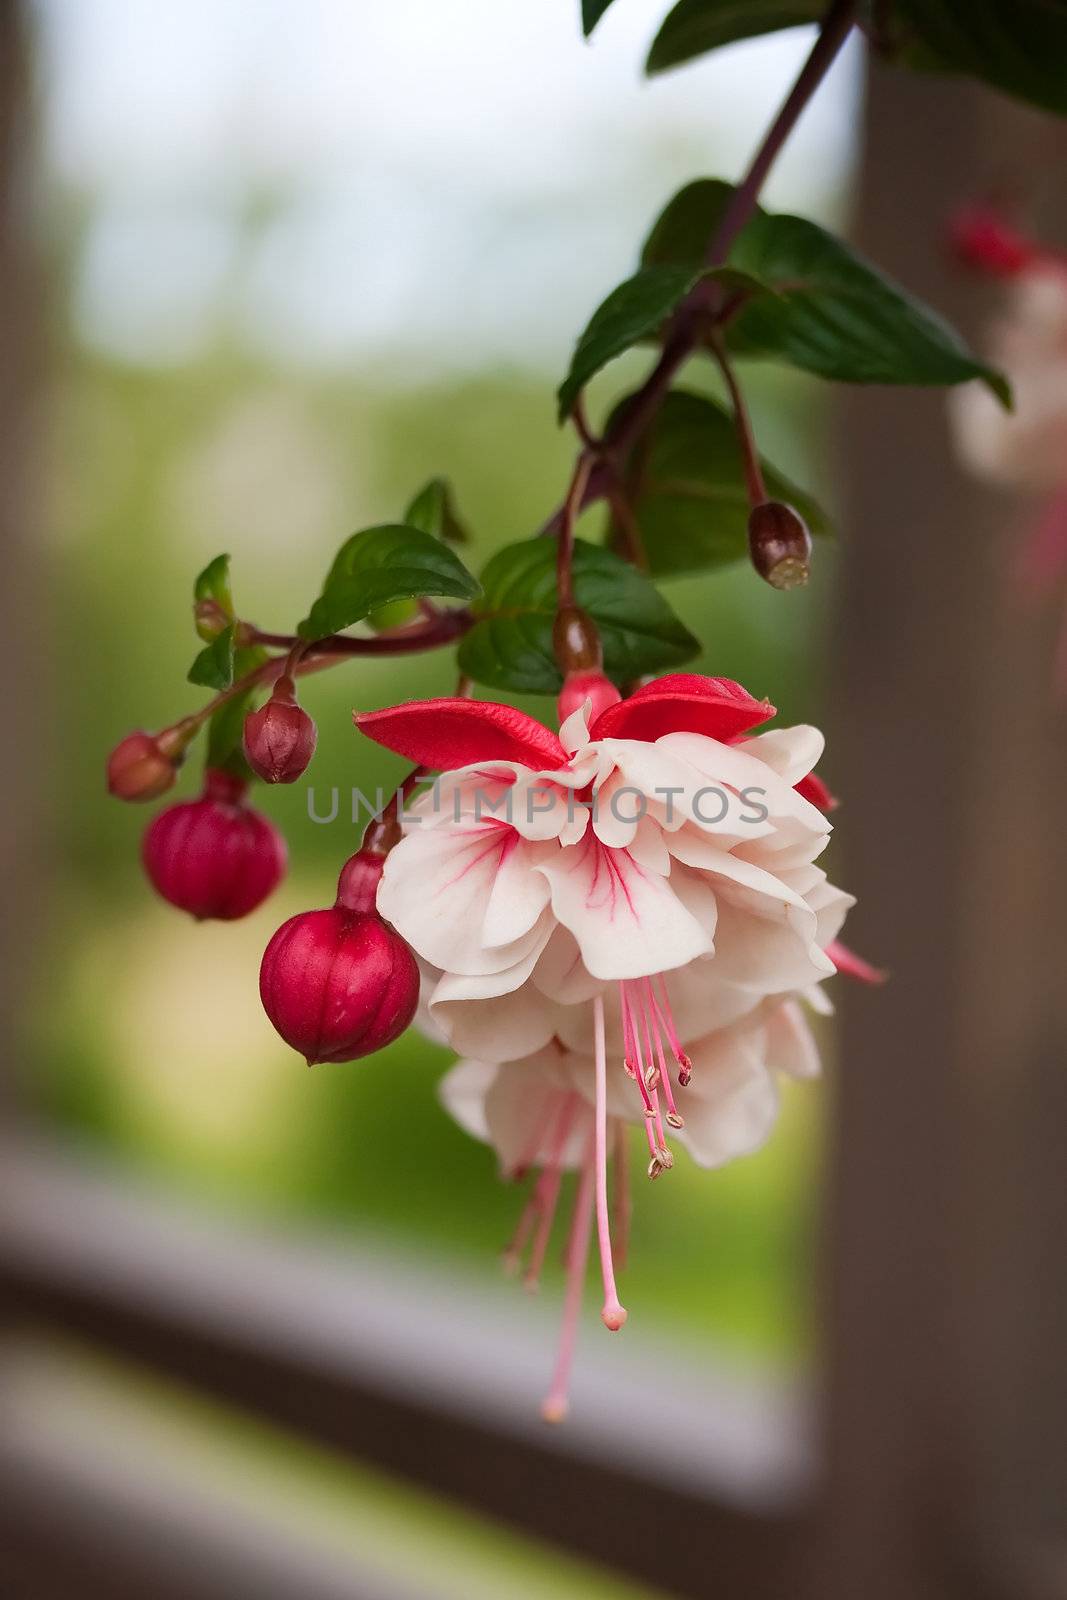 Fuchsia Flower in Red and White